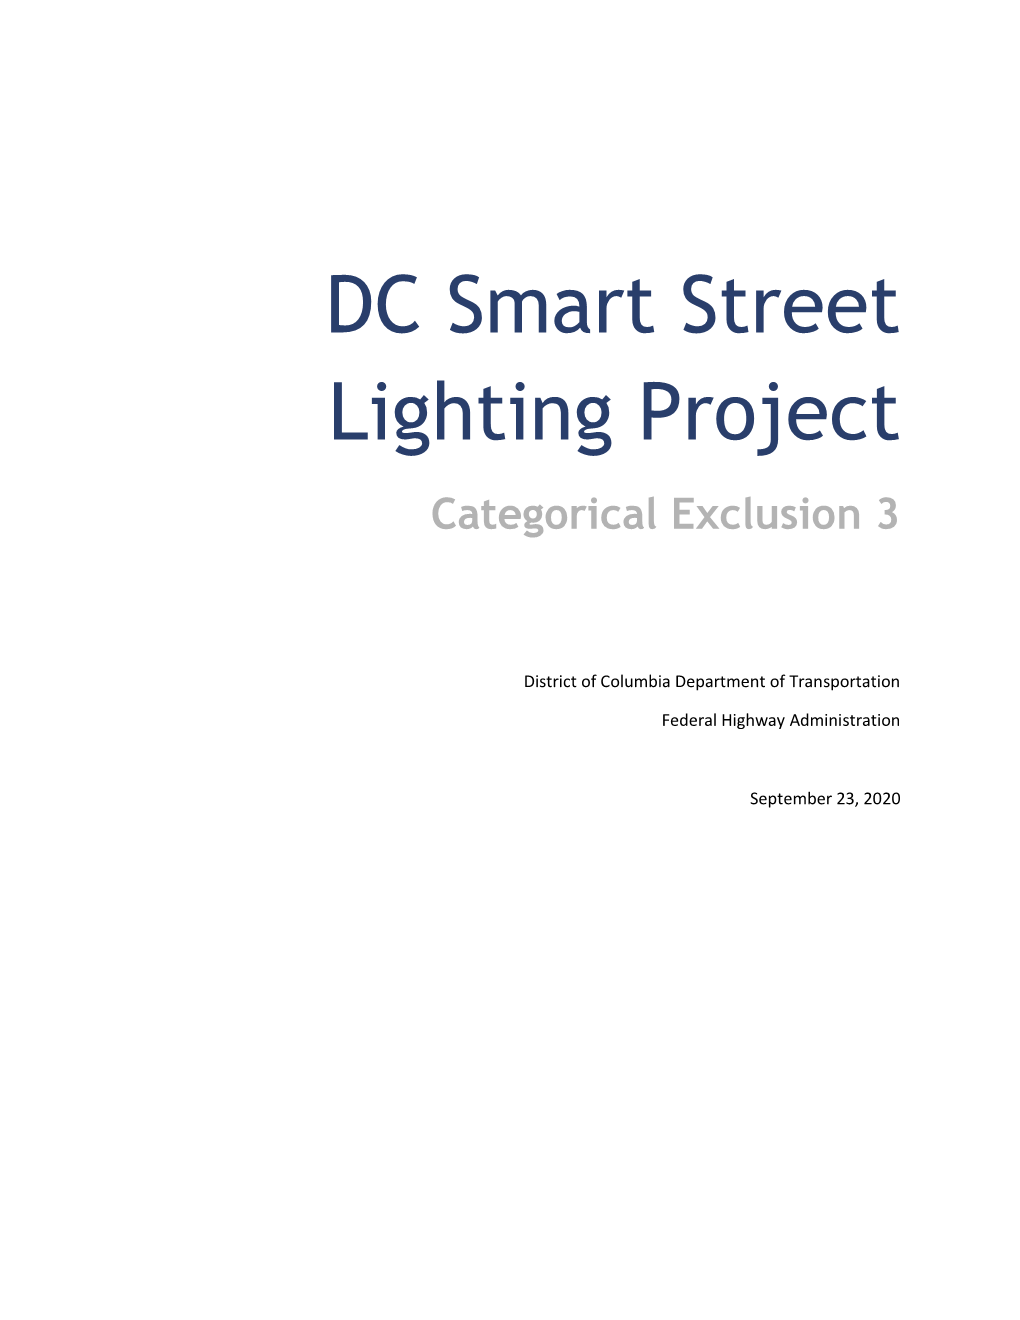 DC Smart Street Lighting Project Categorical Exclusion 3